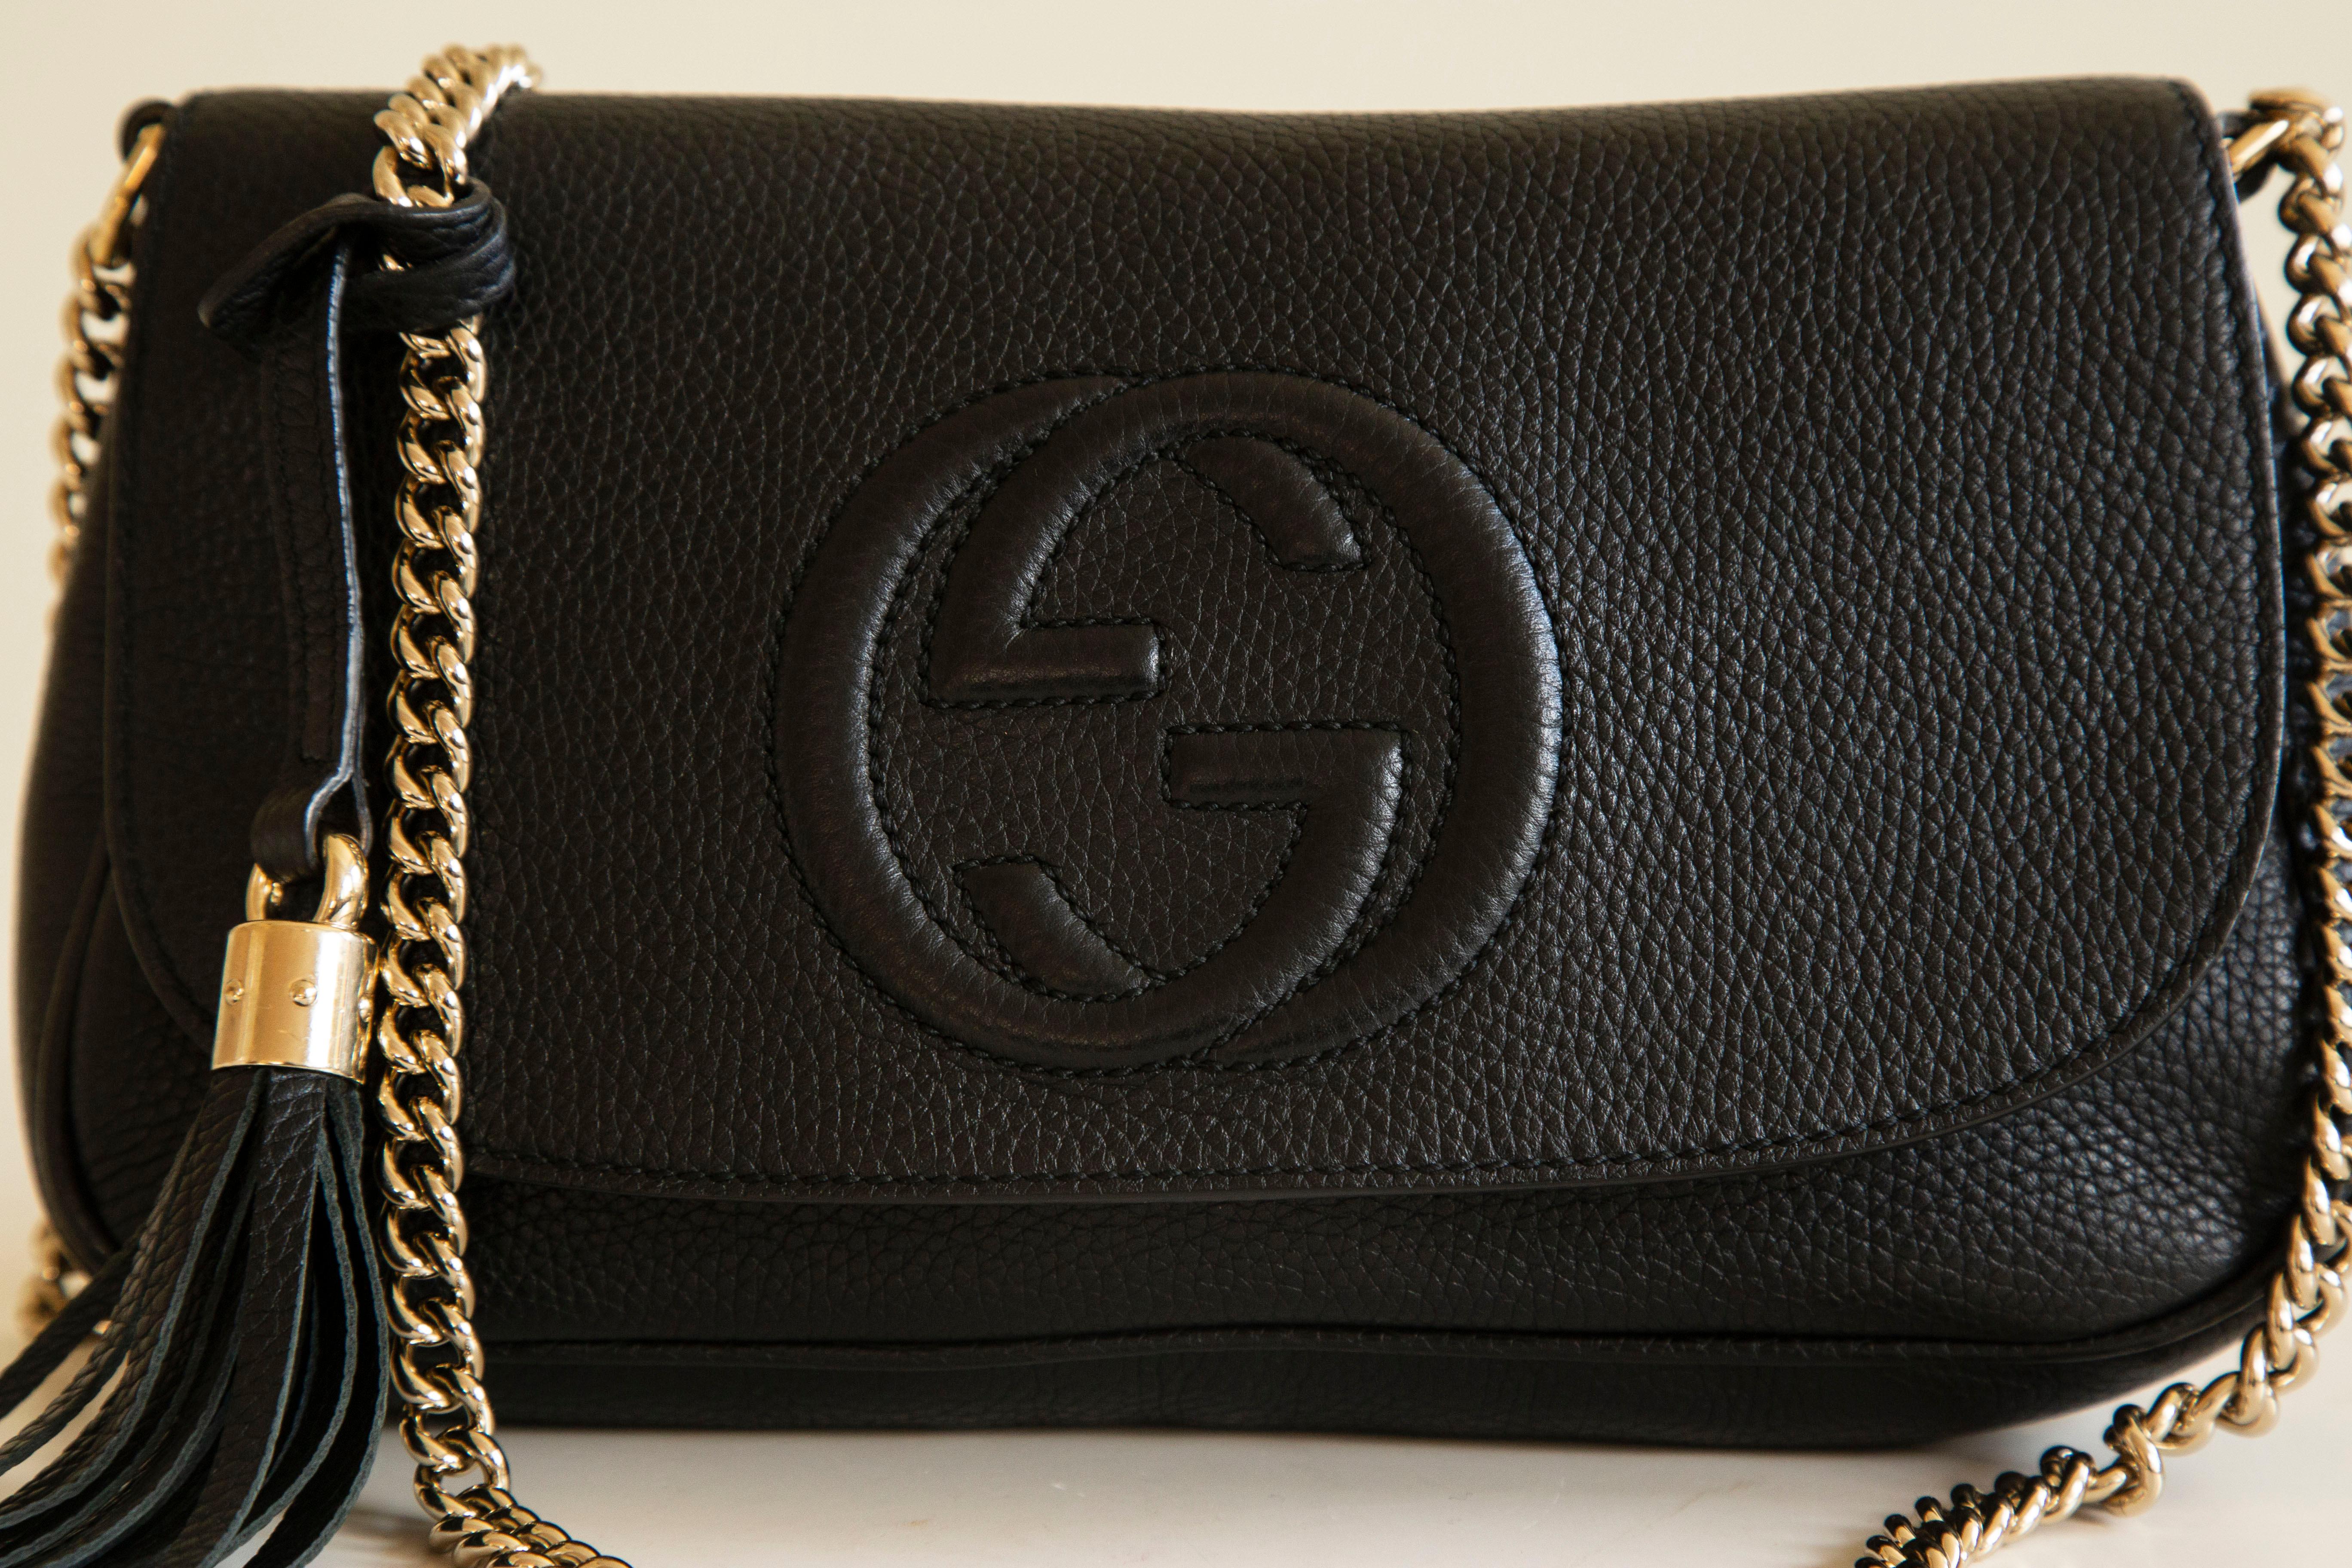 An authentic Gucci Soho crossbody bag in black leather  with chain strap. The bag features a front flap with a magnetic closure. The main compartment is lined with light beige fabric and it contains two side pockets of which one has a zipper. The